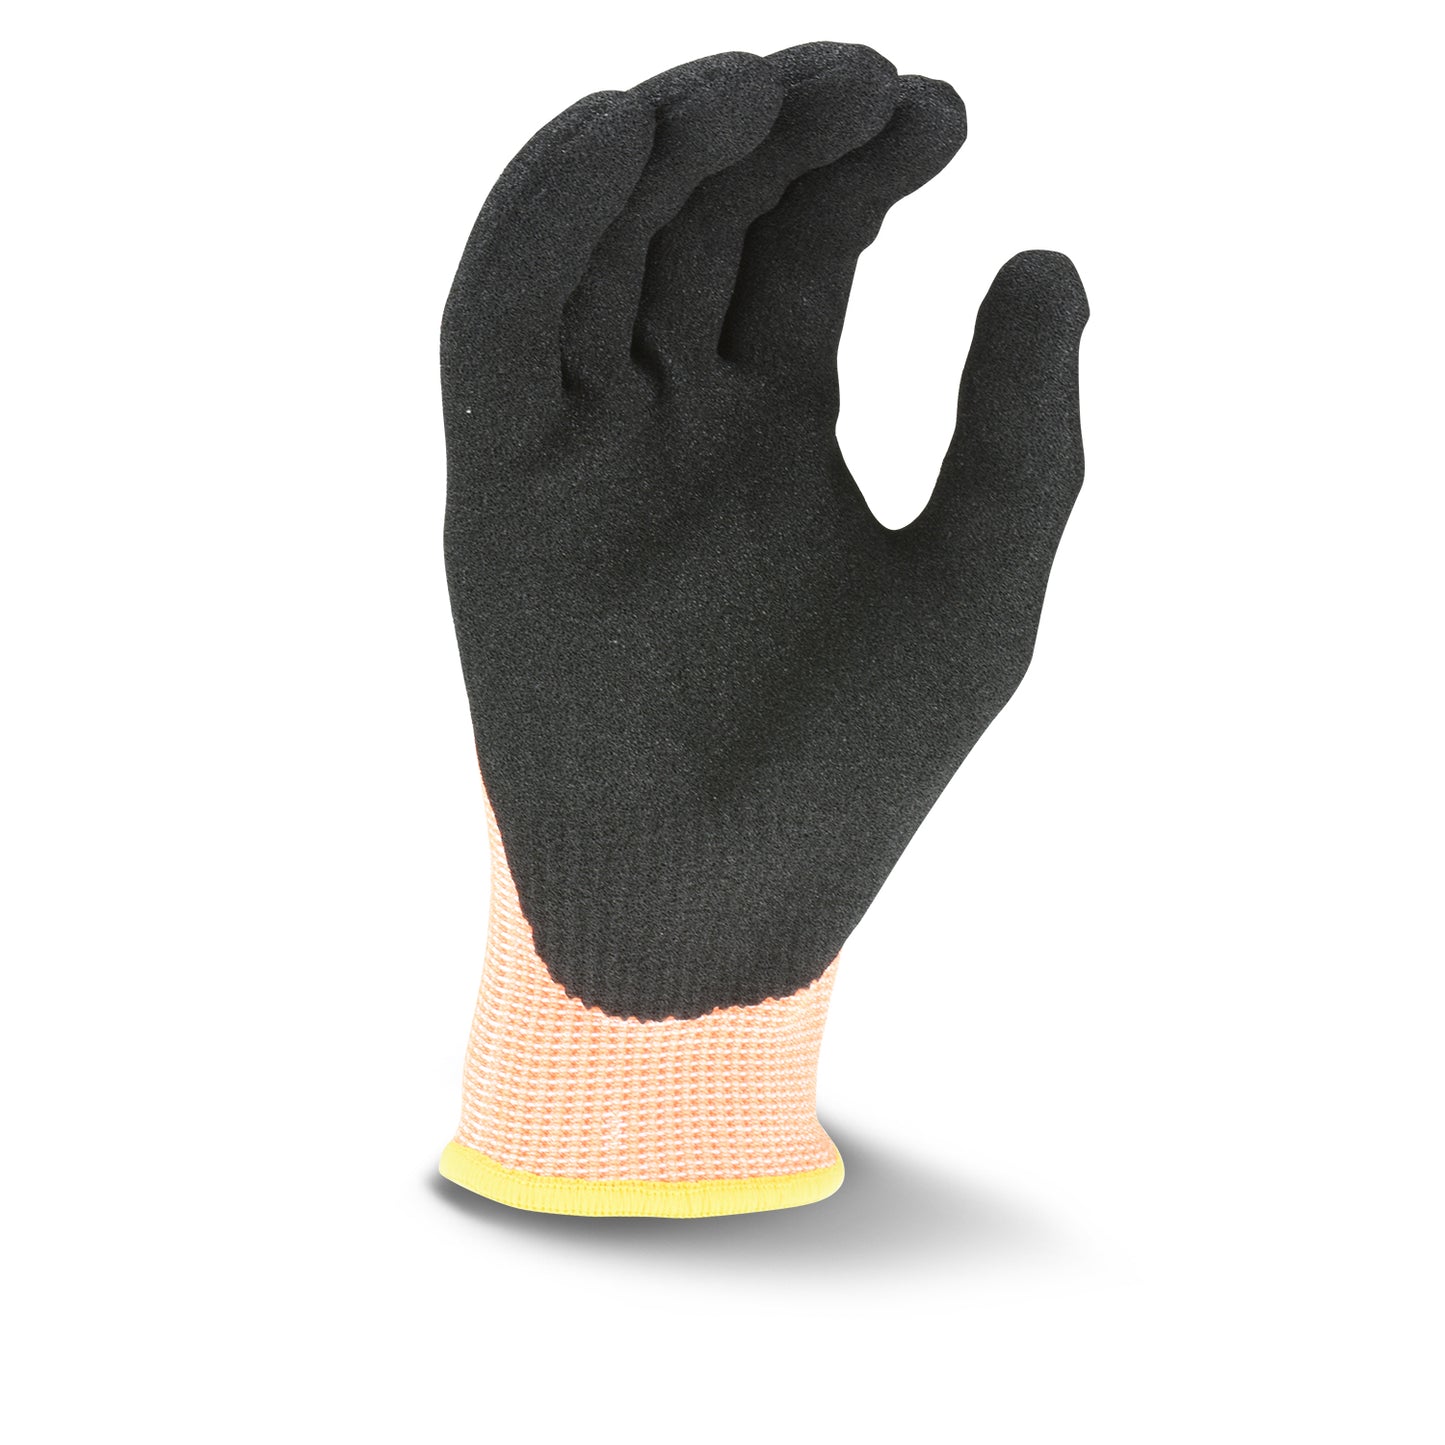 RADIANS RWG559 AXIS™ CUT PROTECTION LEVEL A6 SANDY NITRILE COATED GLOVE